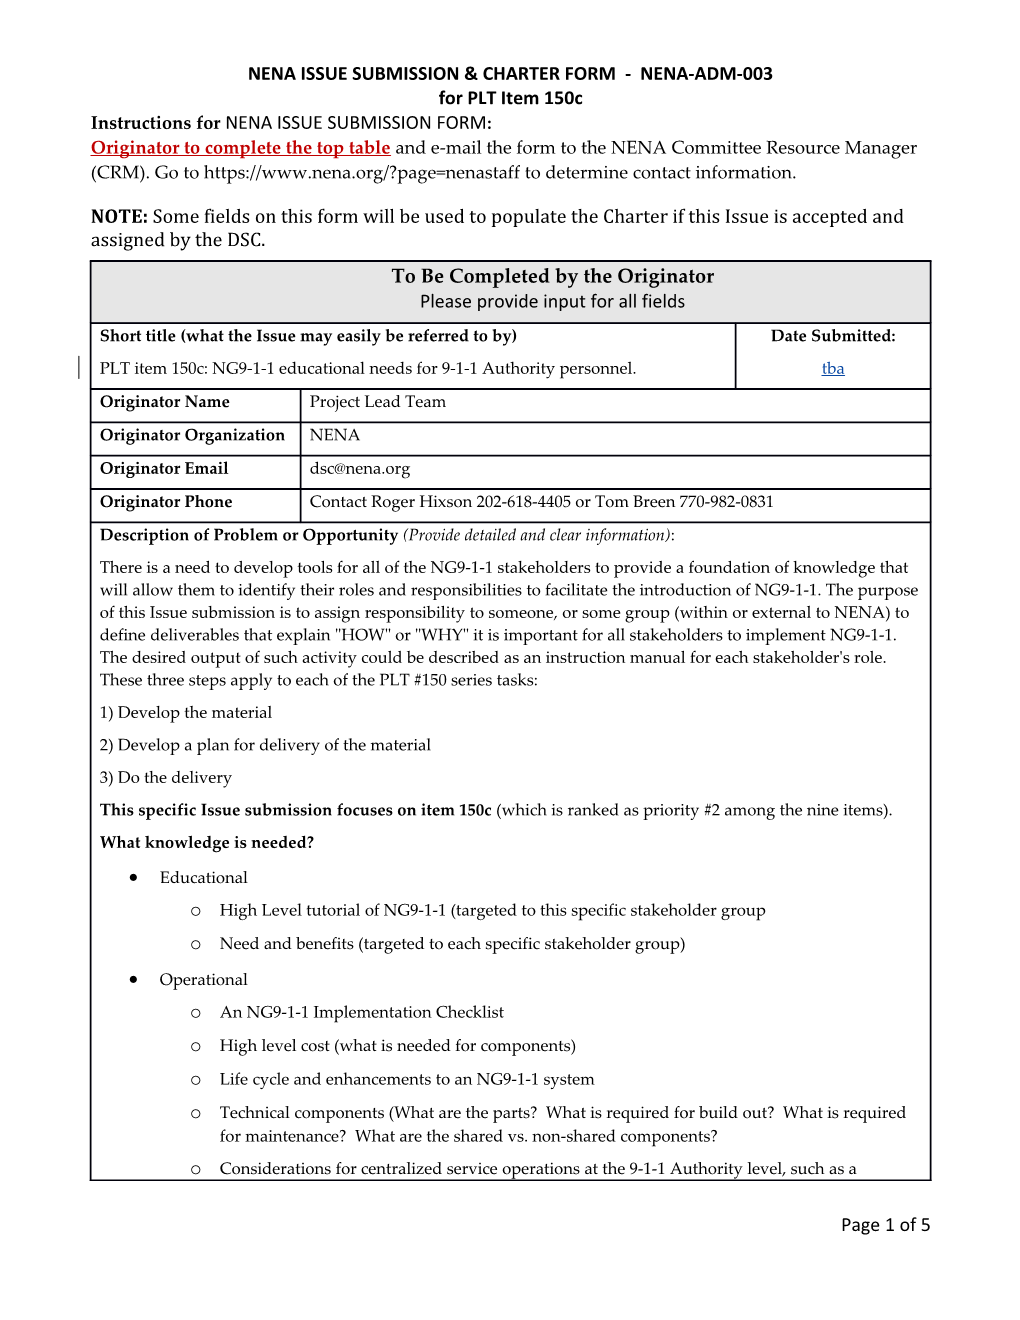 NENA ISSUE SUBMISSION & CHARTER FORM - NENA-ADM-003 for PLT Item 150C